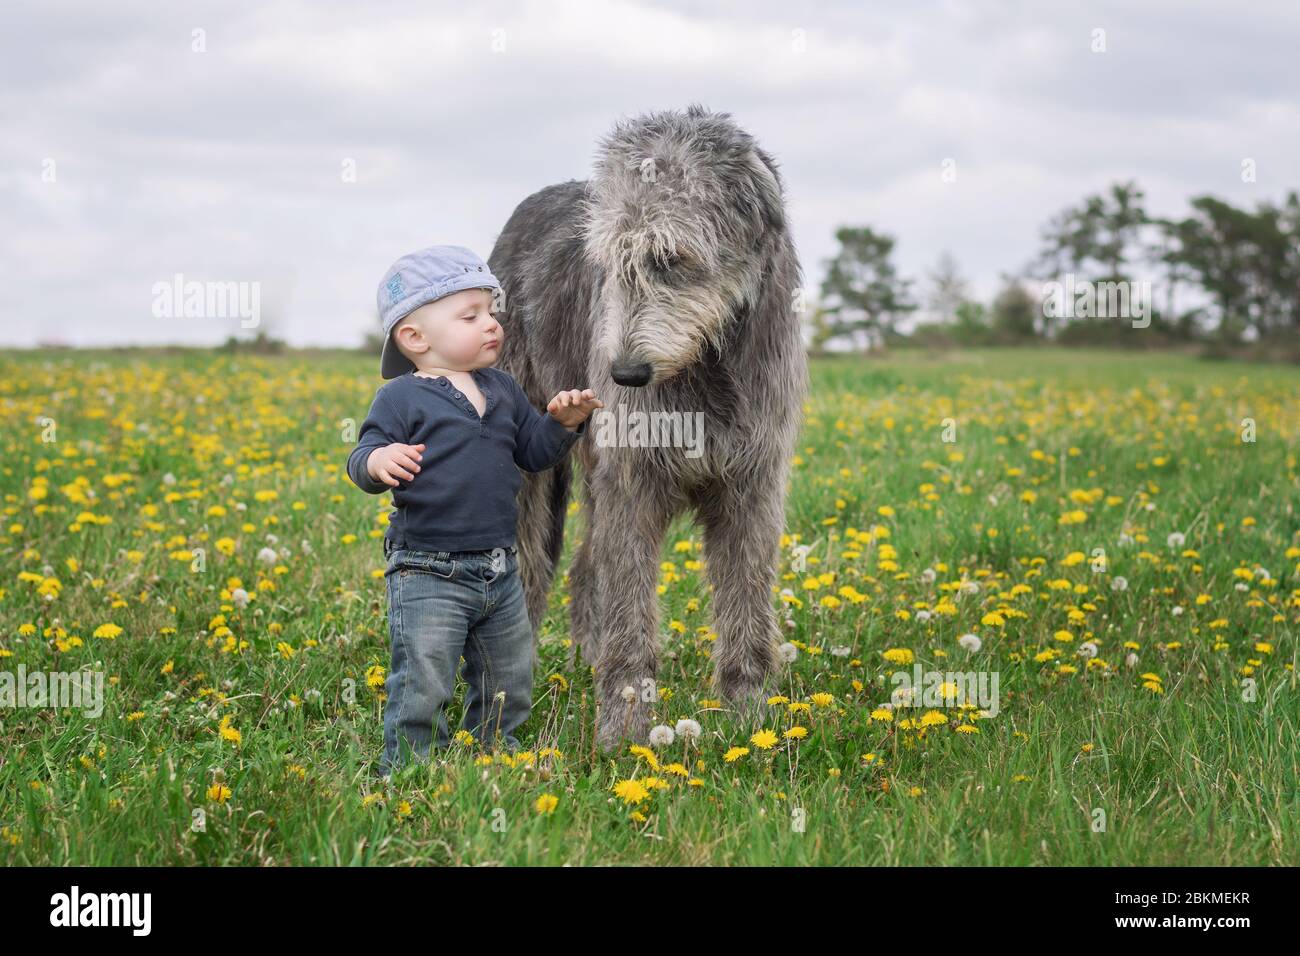 A little Caucasian baby boy in a baseball cap stands with his big friend Irish Wolfhound in a meadow full of blooming dandelions with a cloudy sky in Stock Photo